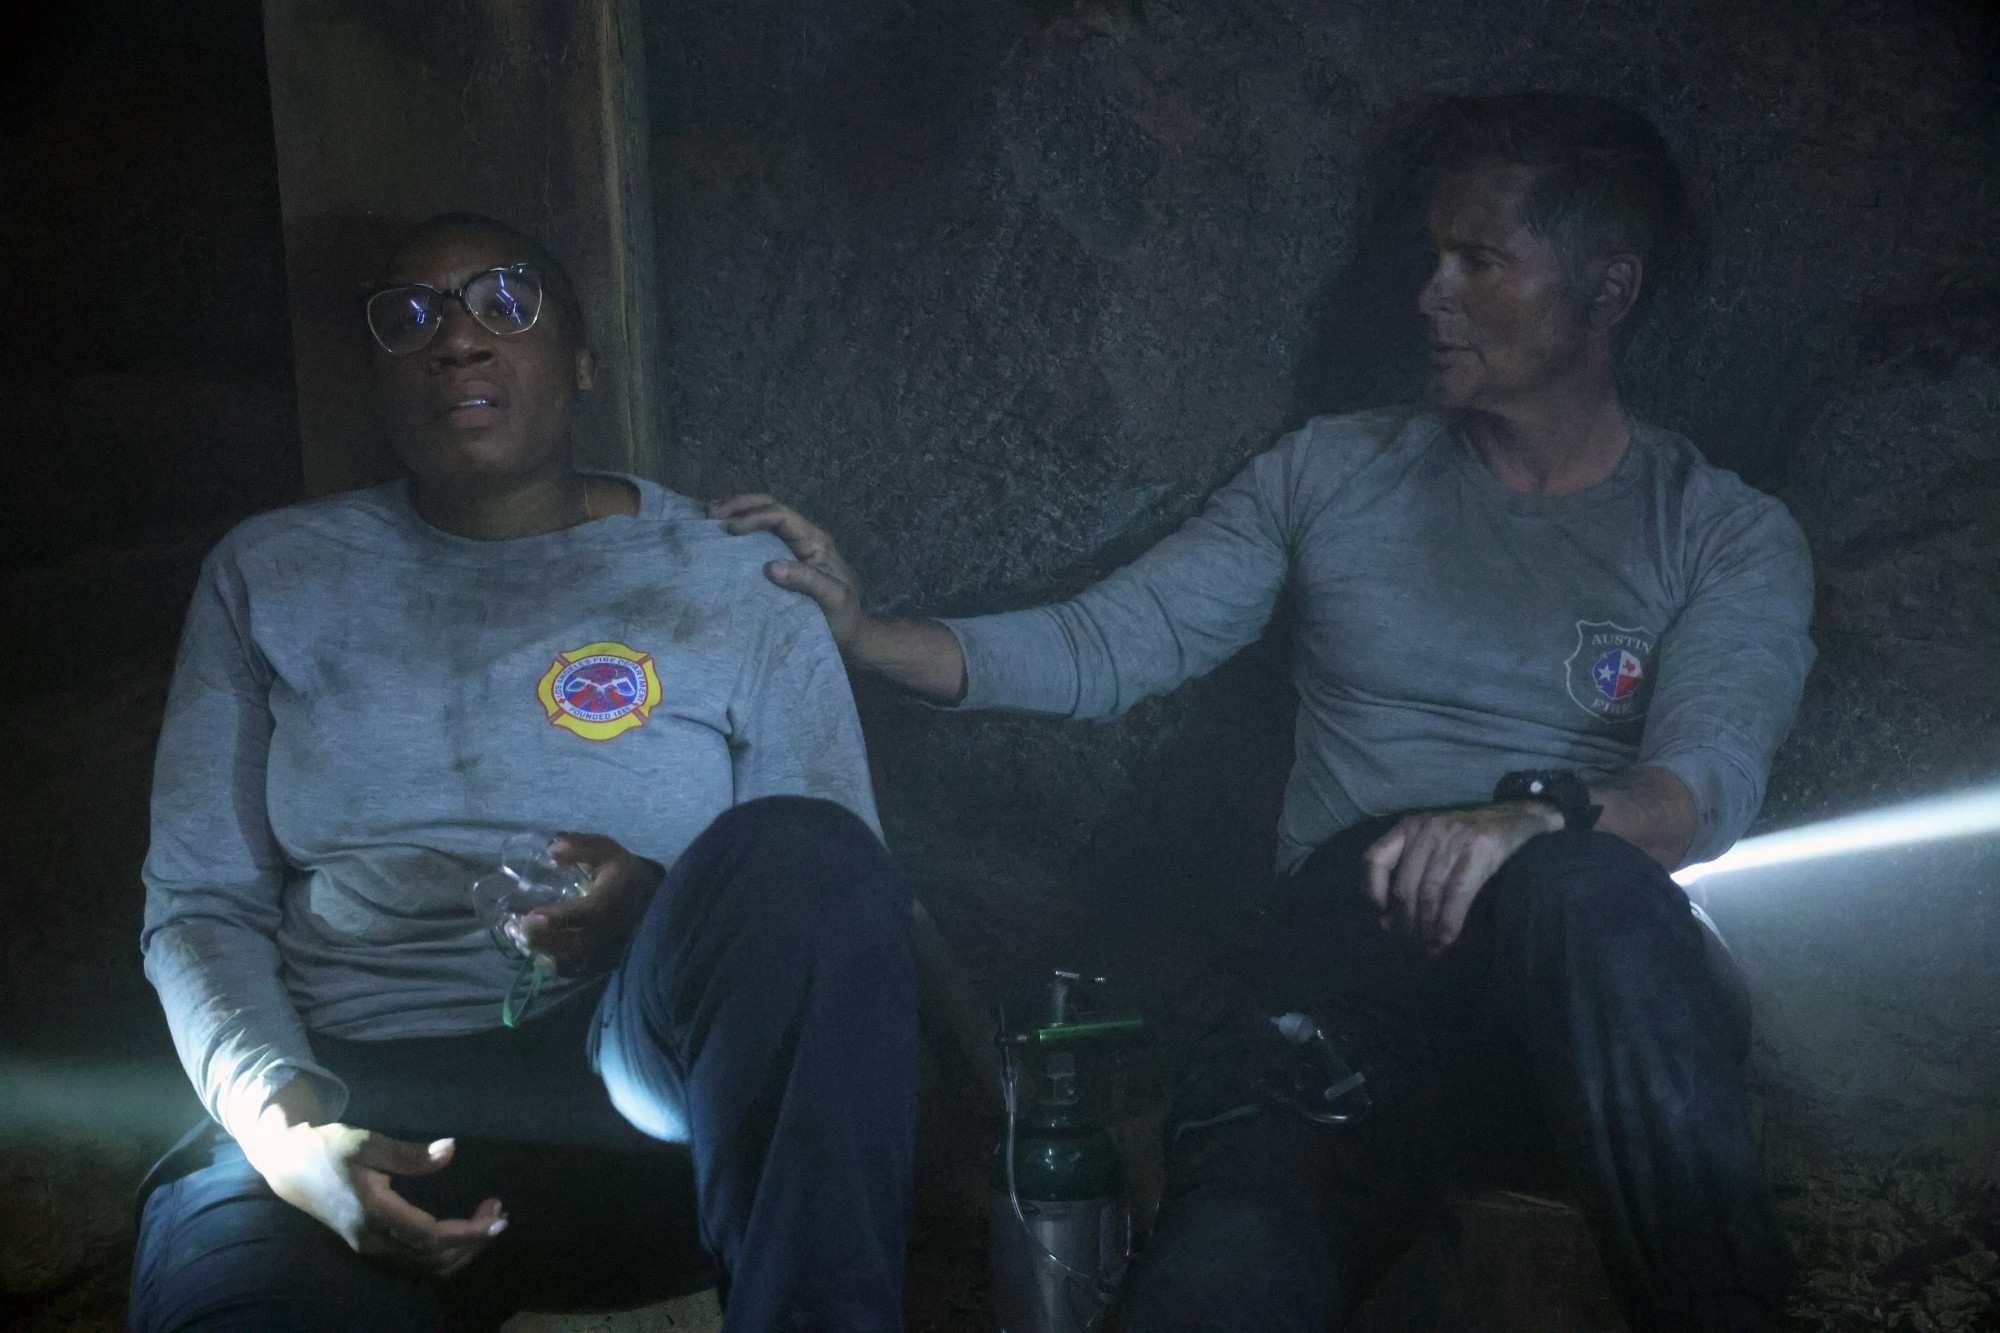 9-1-1: LONE STAR: L-R: Special guest star Aisha Hinds and Rob Lowe in the “Hold The Line” episode of 9-1-1: LONE STAR airing Monday, Feb. 1 (9:01-10:00 PM ET/PT) on FOX. © 2021 Fox Media LLC. CR: Jordin Althaus/FOX.